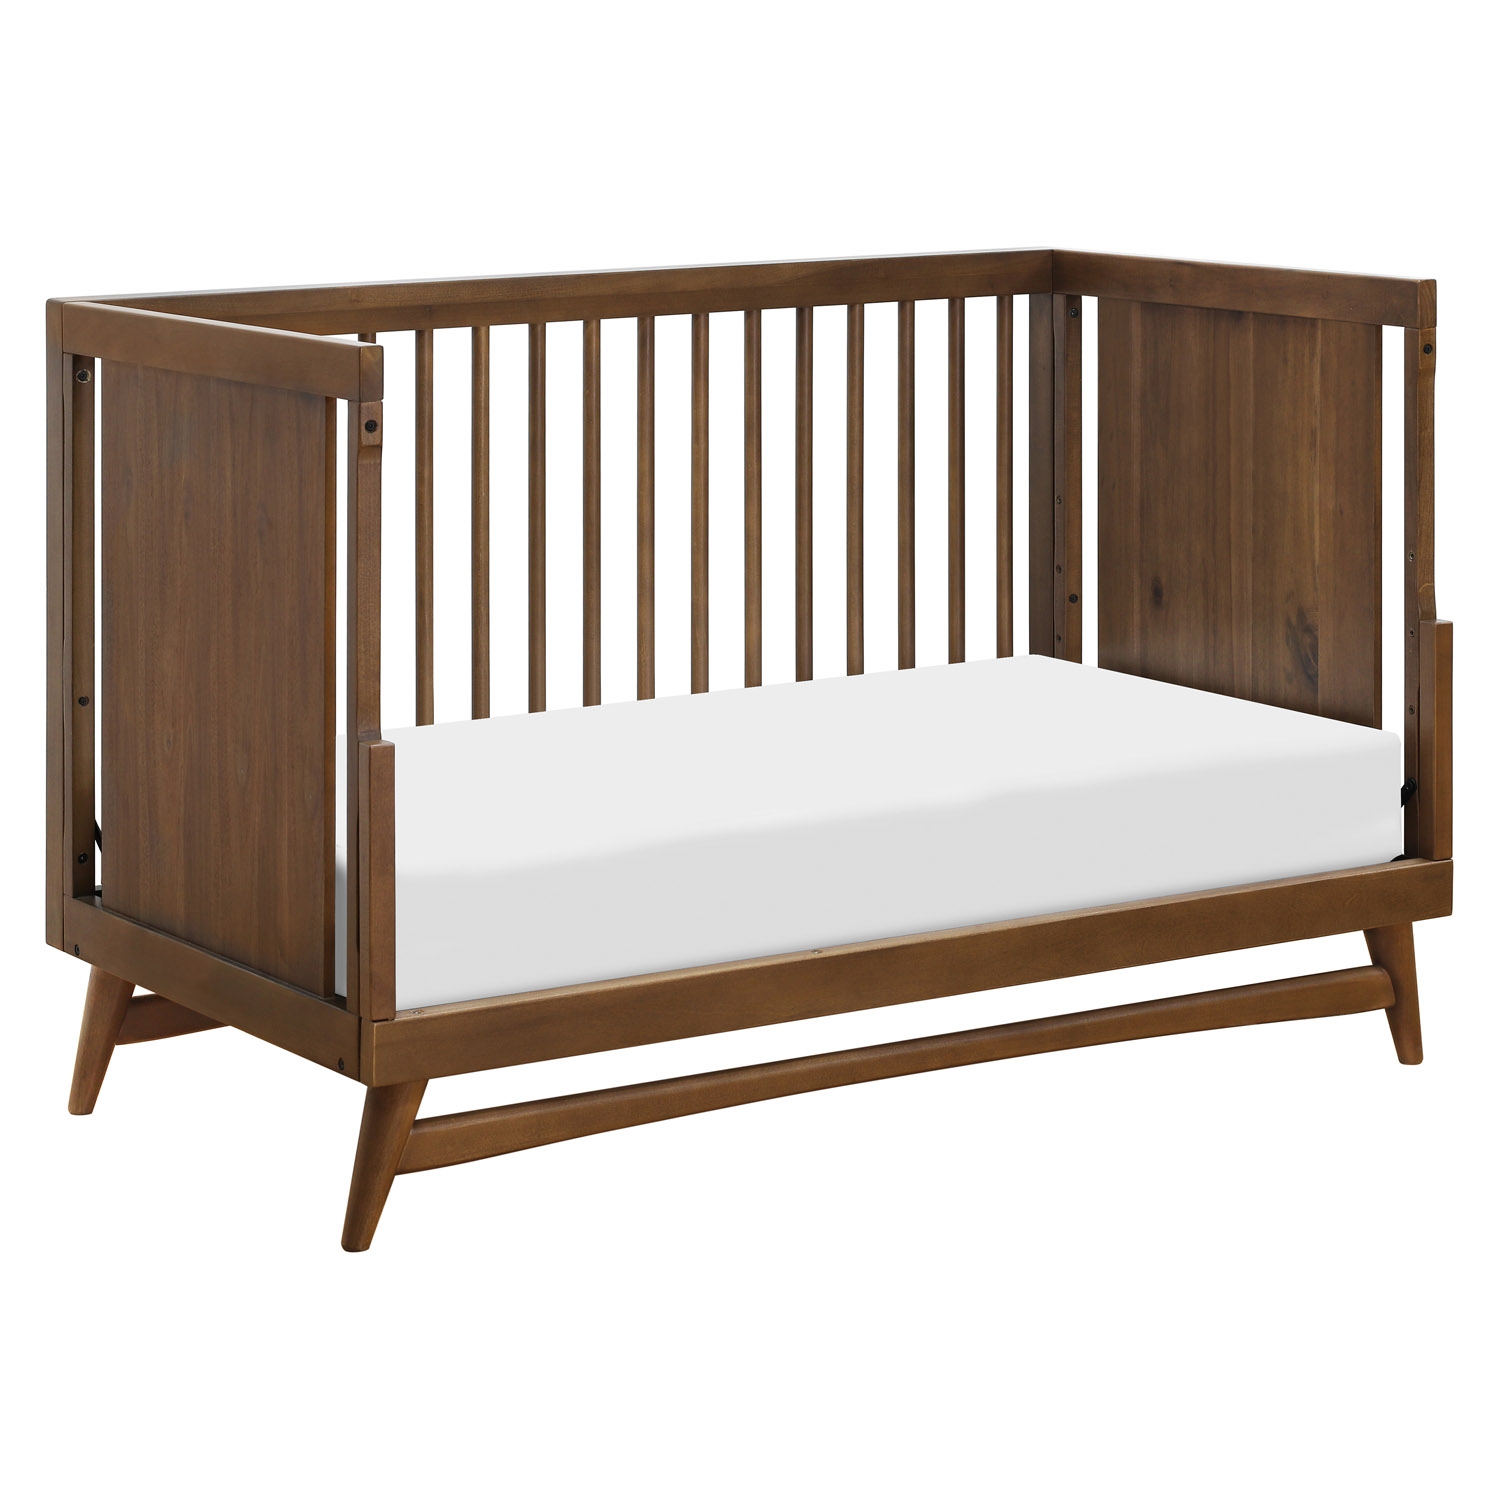 Babyletto Peggy Mid Century Modern Brown Wood Convertible Crib - Image 4